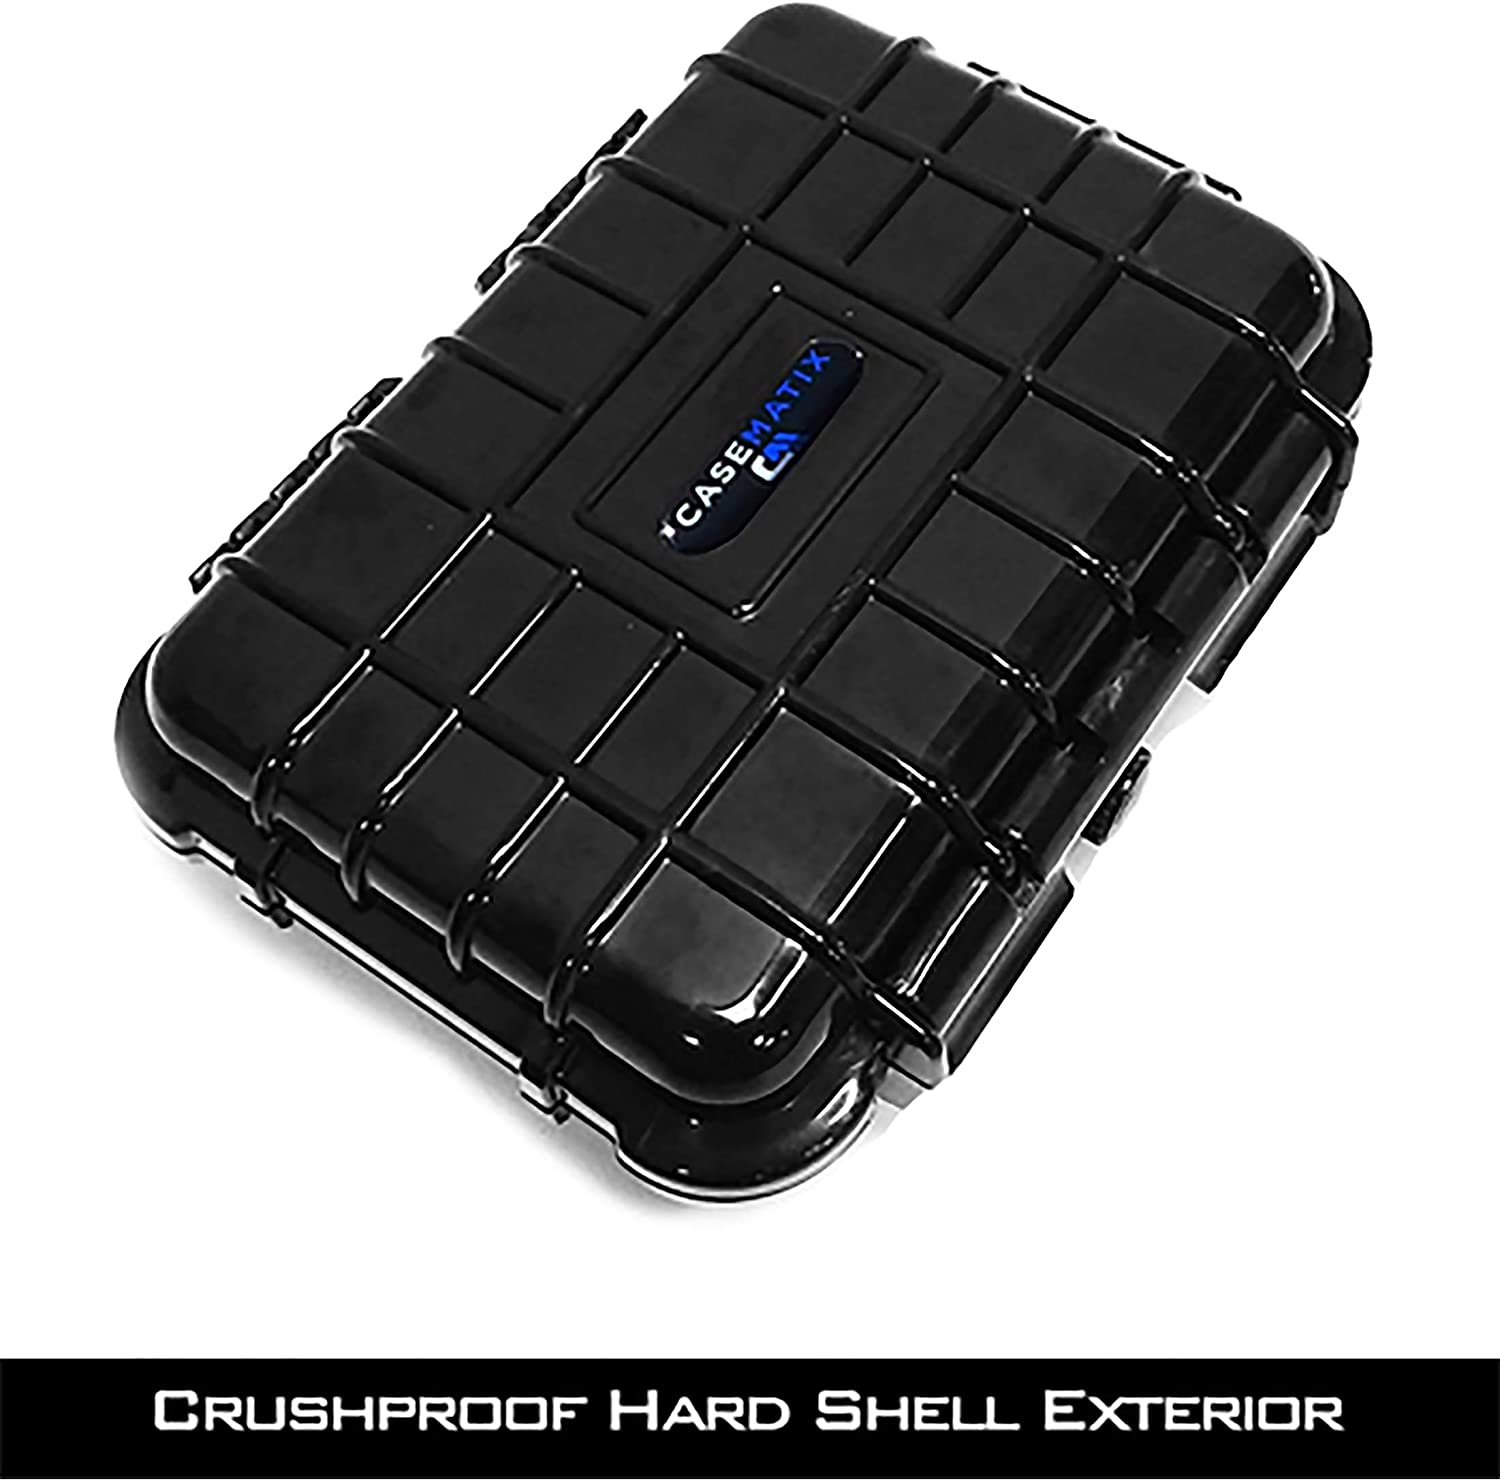 Casematix 16 inch Trading Card Case and Card Game Organizer for 3200 Cards - Hard Shell Card Case Holder for Trading Cards with 40 Foam Cubes, Black